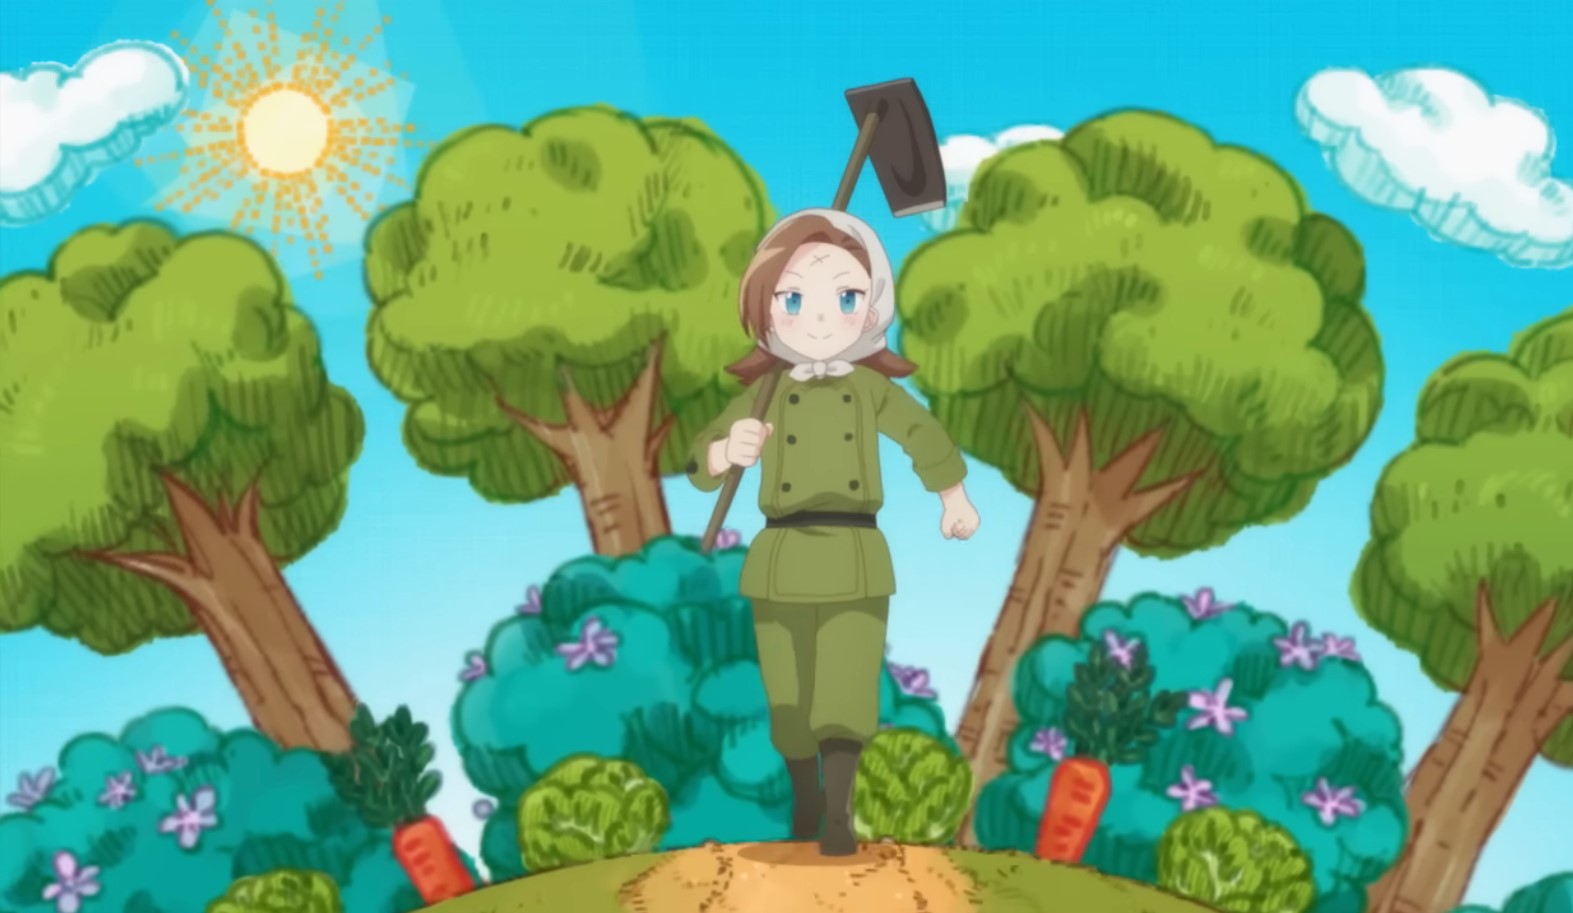 A brown-haired anime girl in an olive green gardening outfit holding a tool in one hand and smiling.